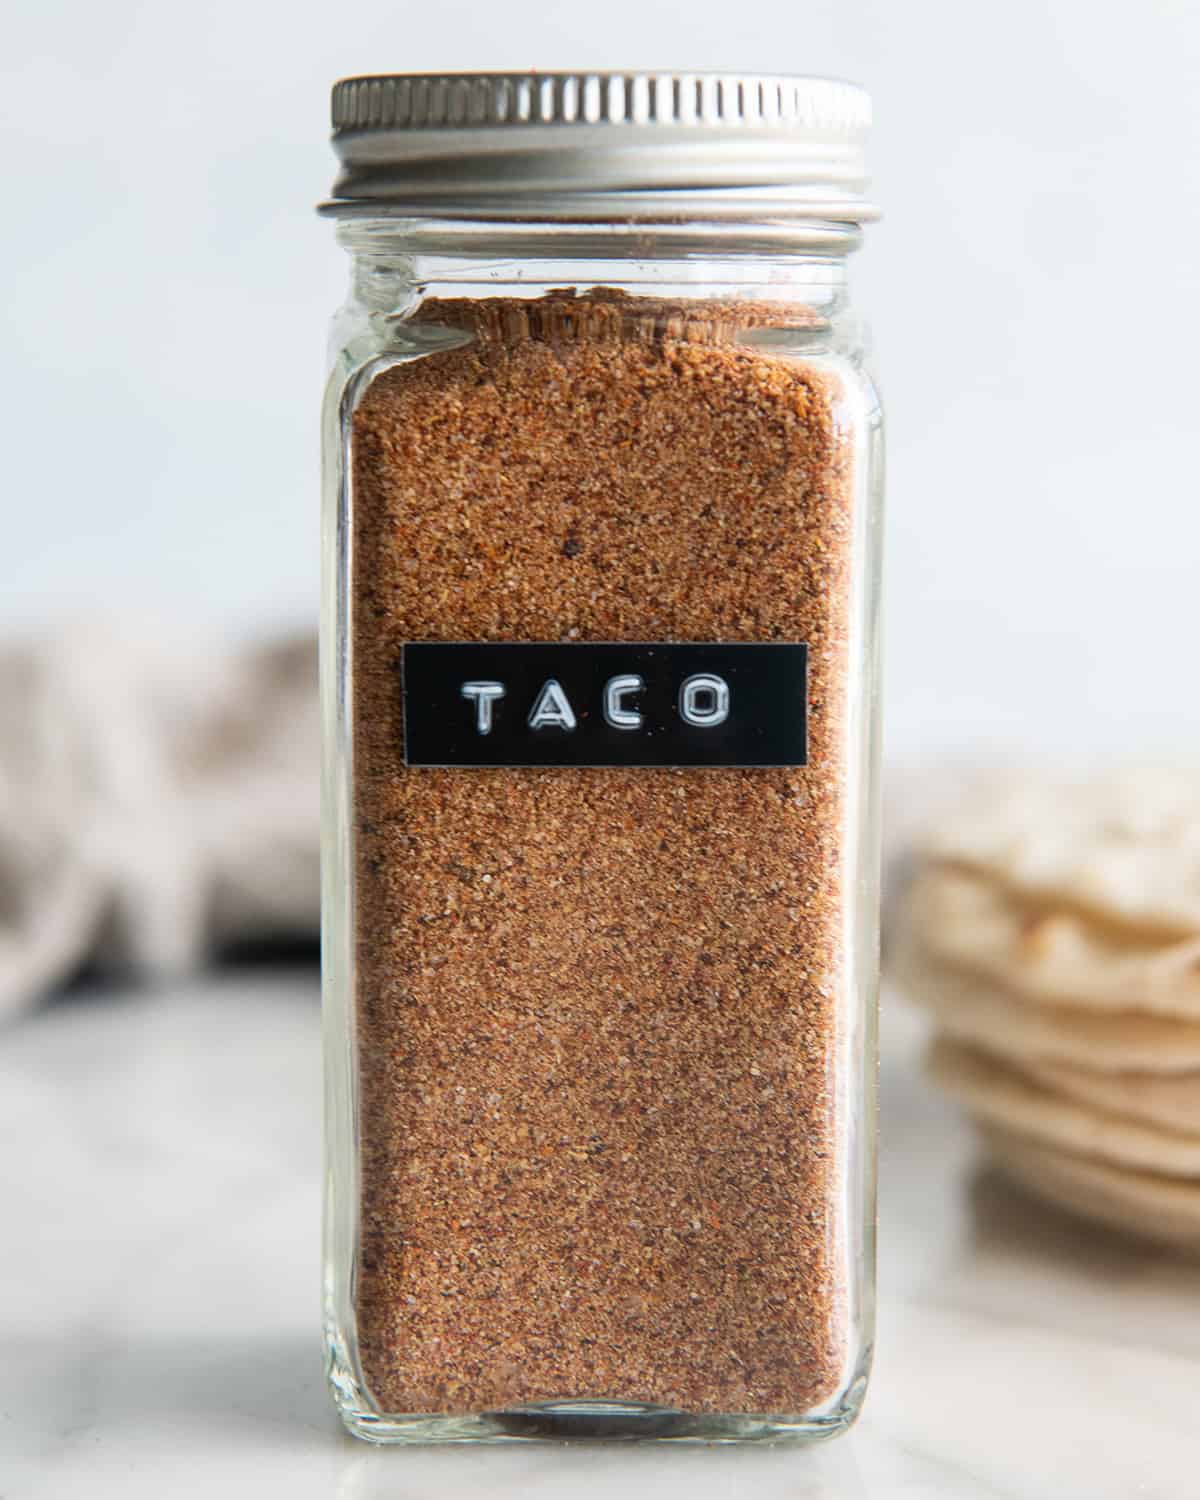 a glass spice jar of Homemade Taco Seasoning with a label "taco"